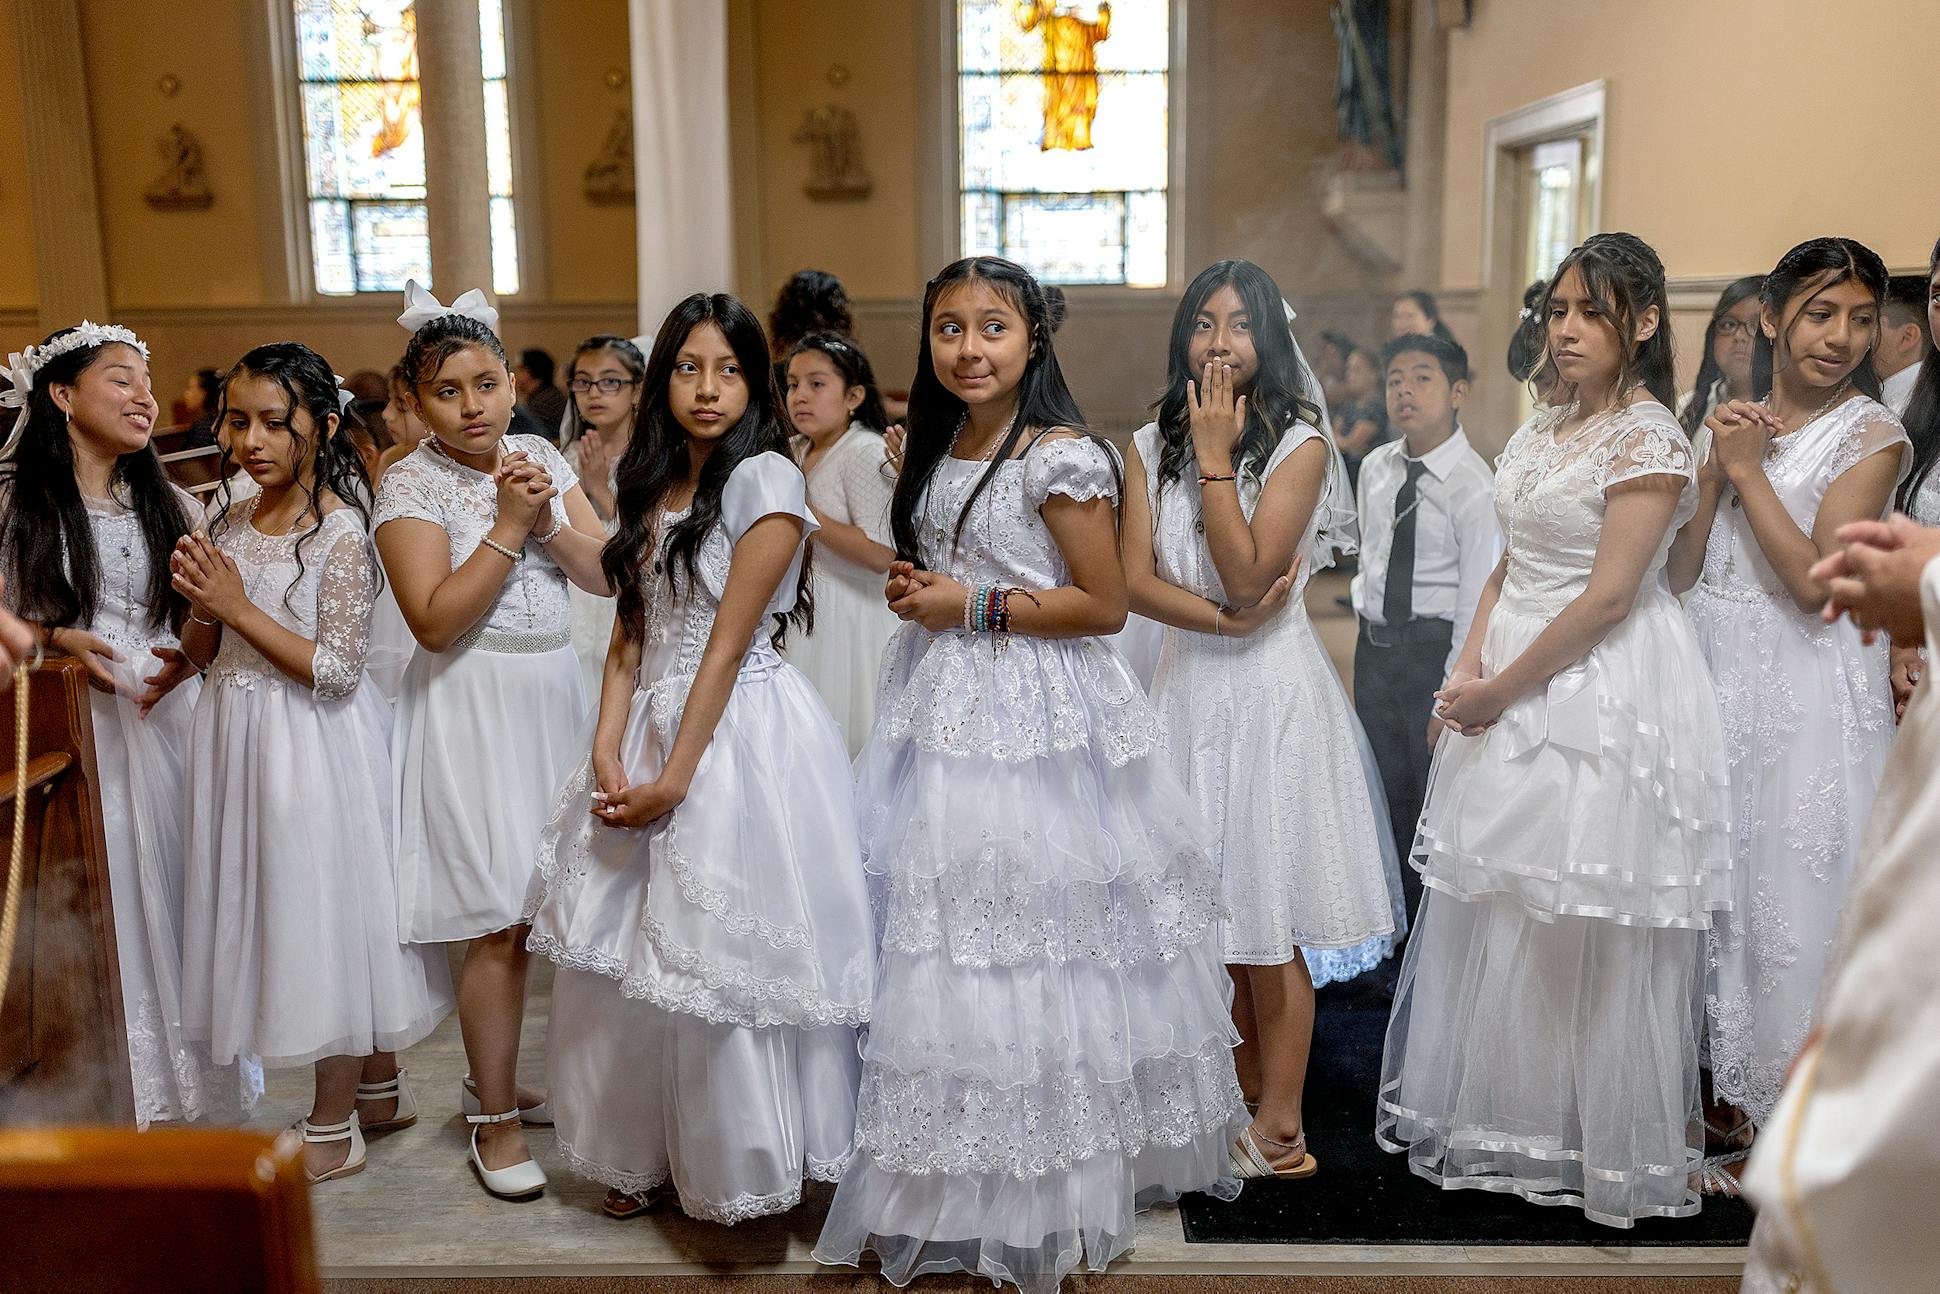 Young girls and boys line up to make their way down the aisle for their first communion at Saints Cyril and Methodius Church.